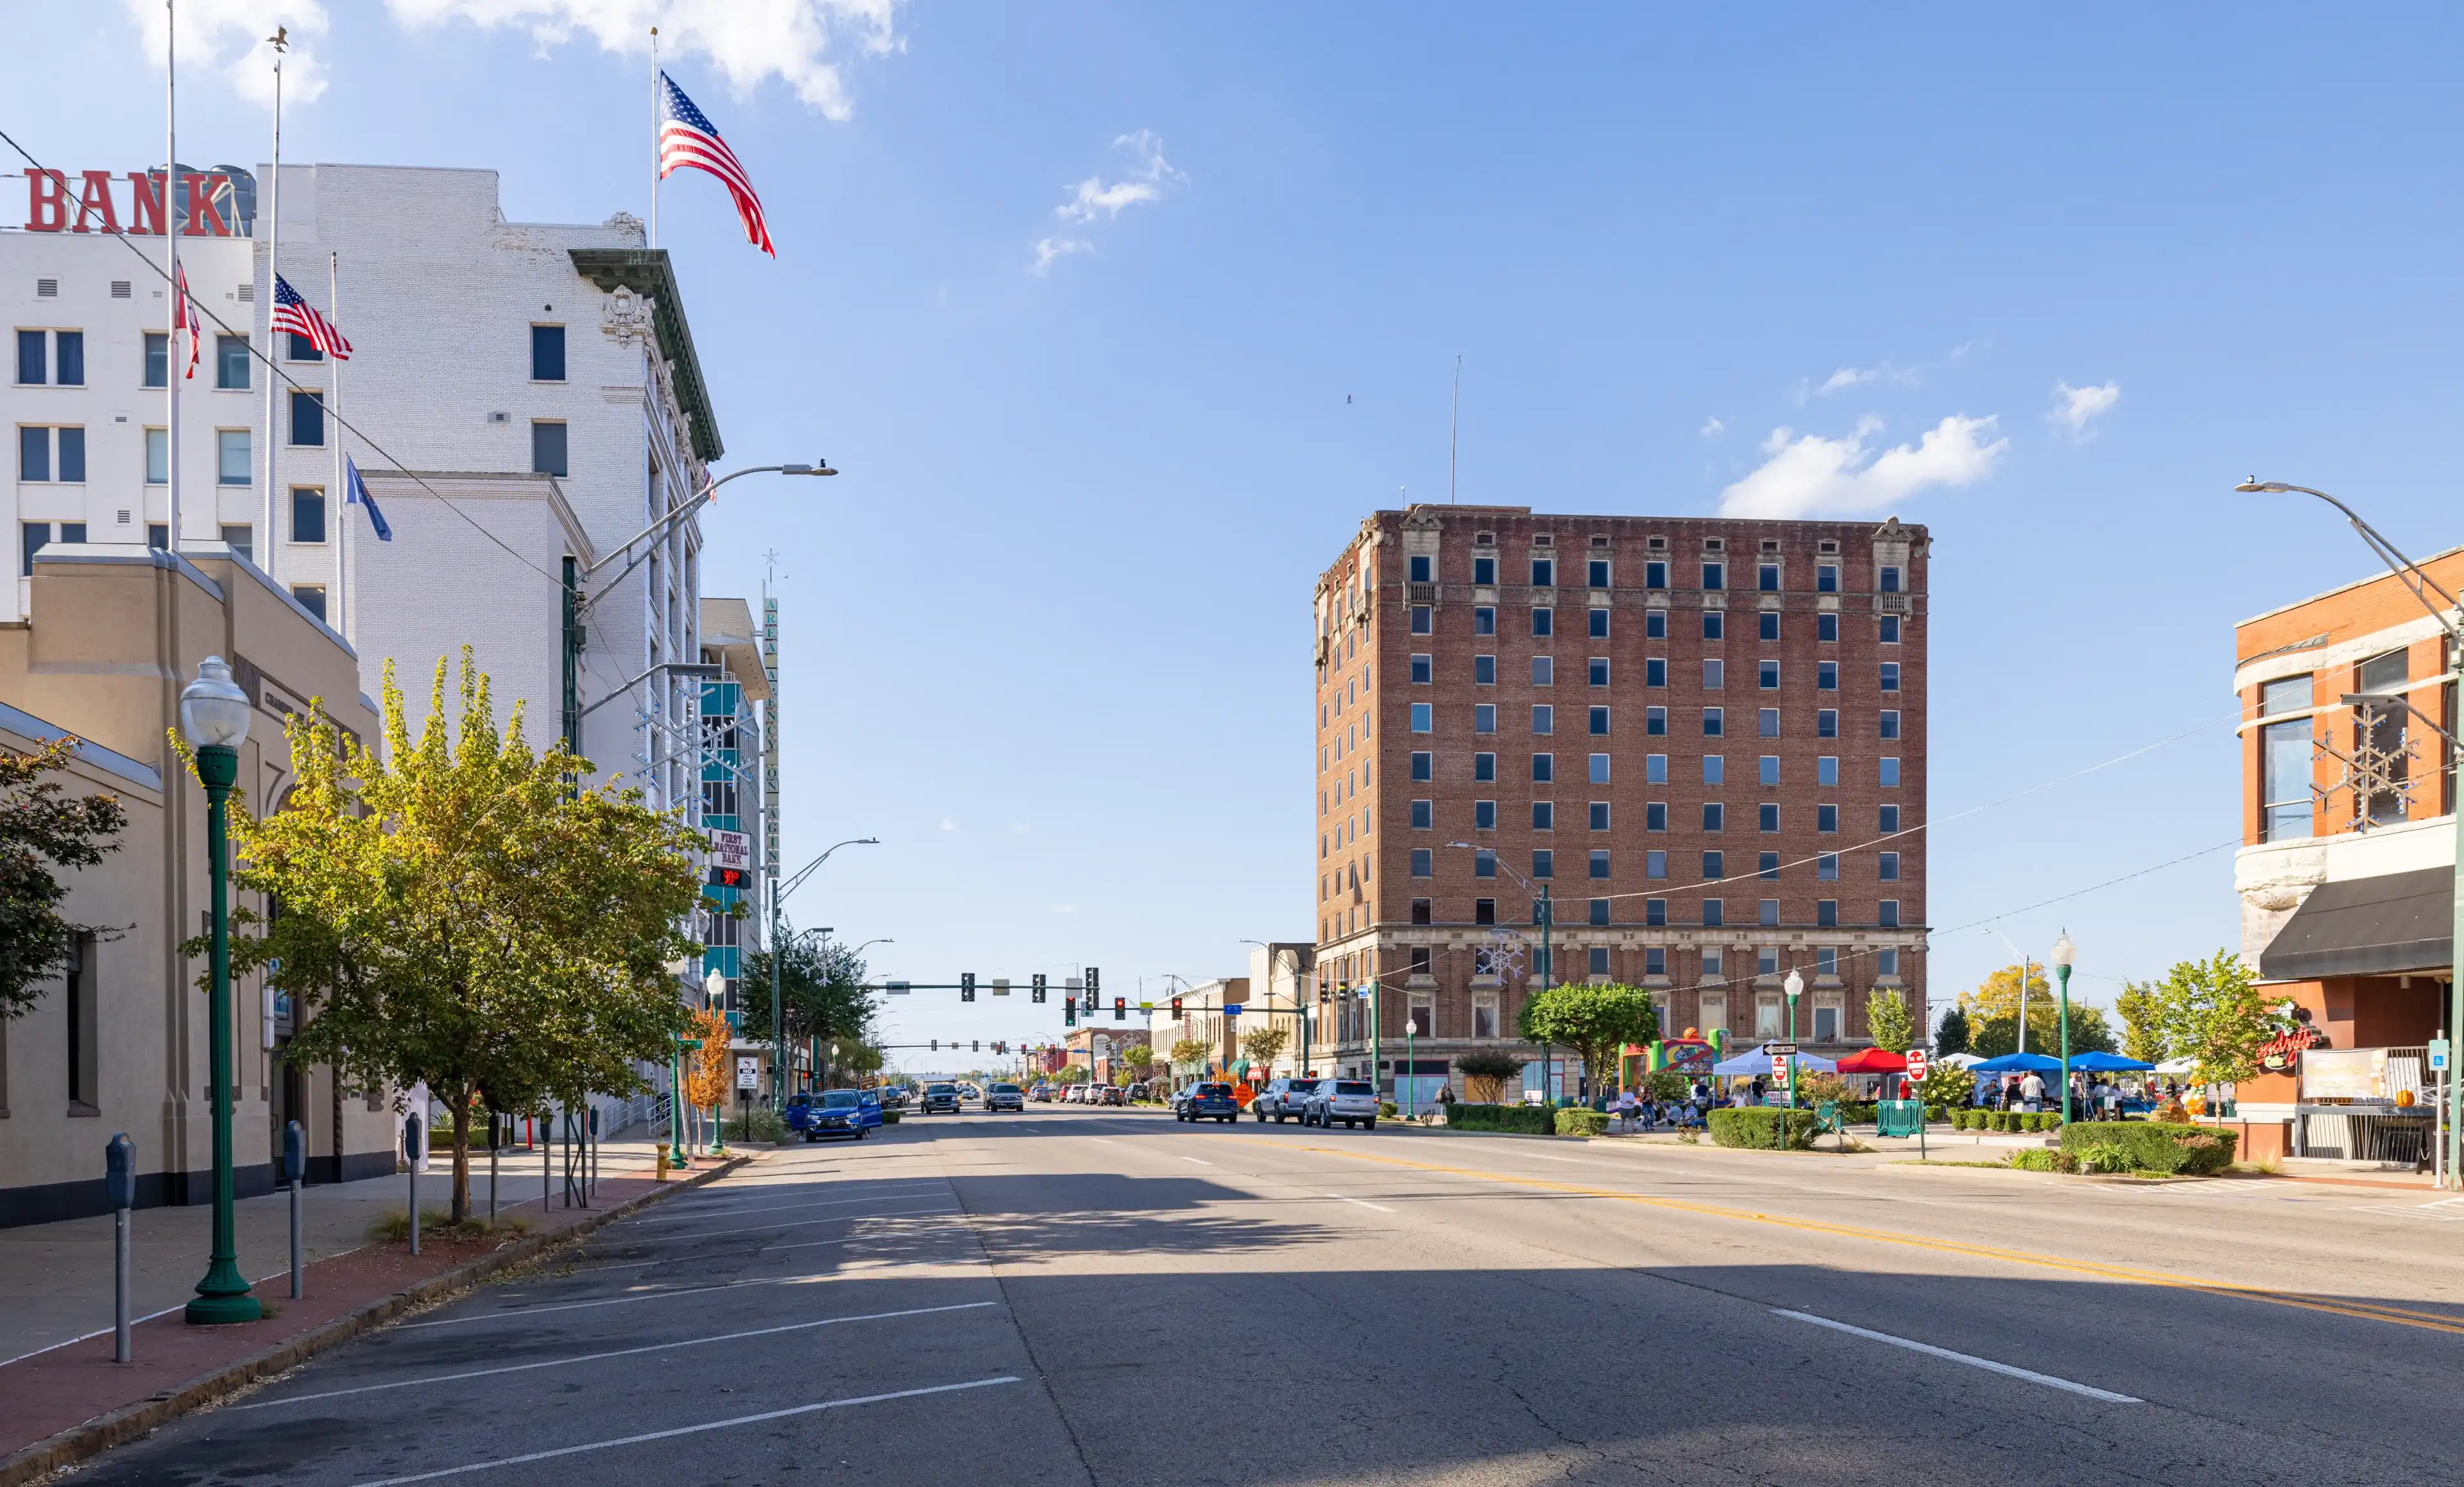 Best Fort Smith hotels. Cheap hotels in Fort Smith, Arkansas, United States